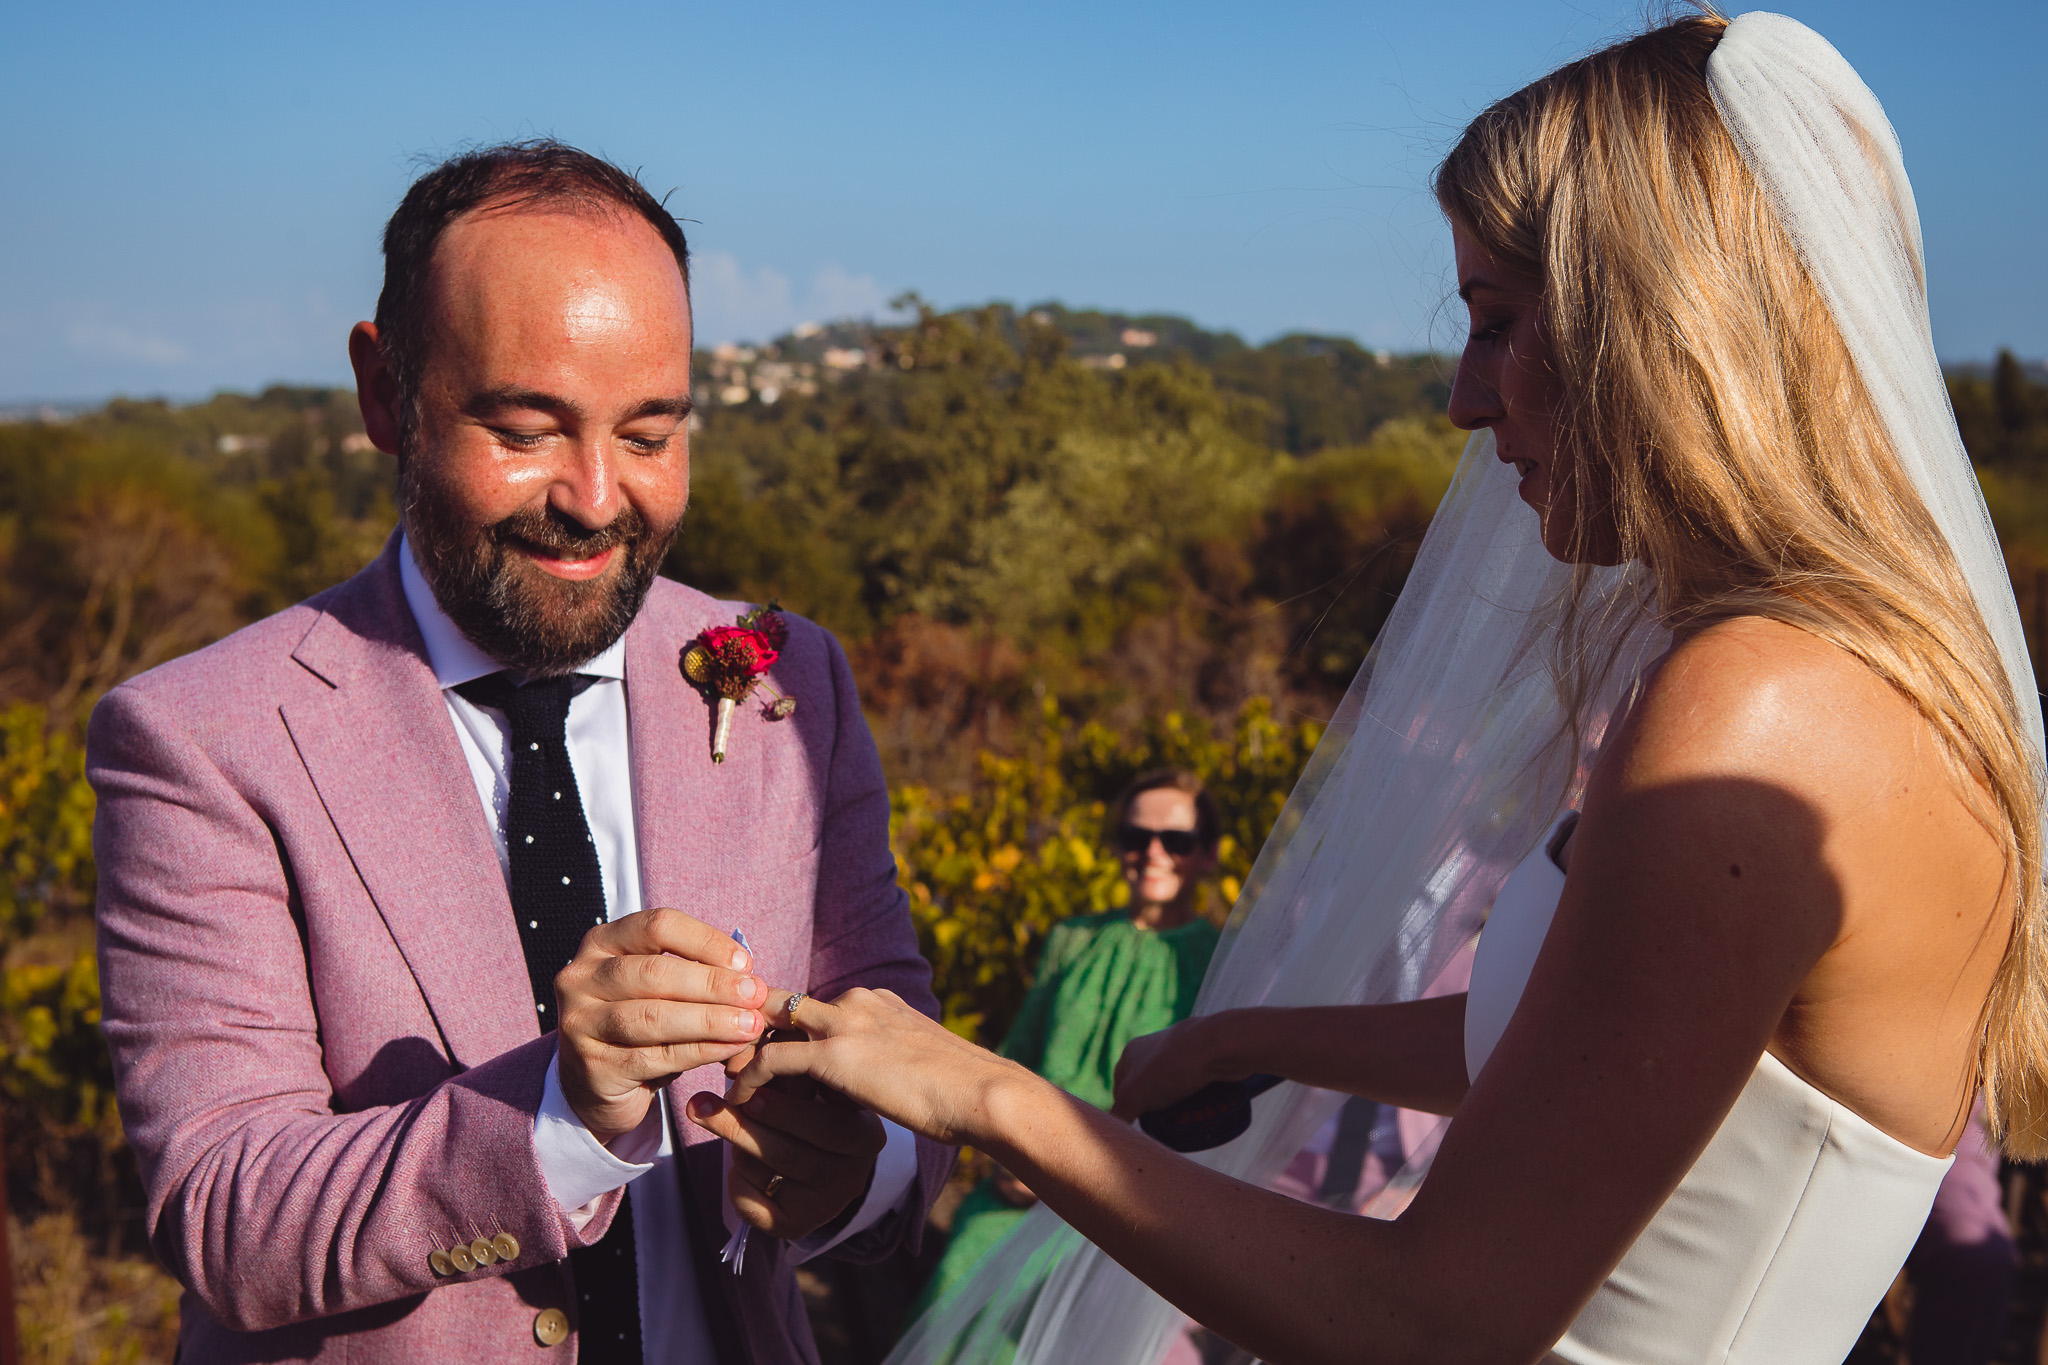 The groom puts a ring on the bride's finger during the wedding ceremony at their destination wedding in Corfu